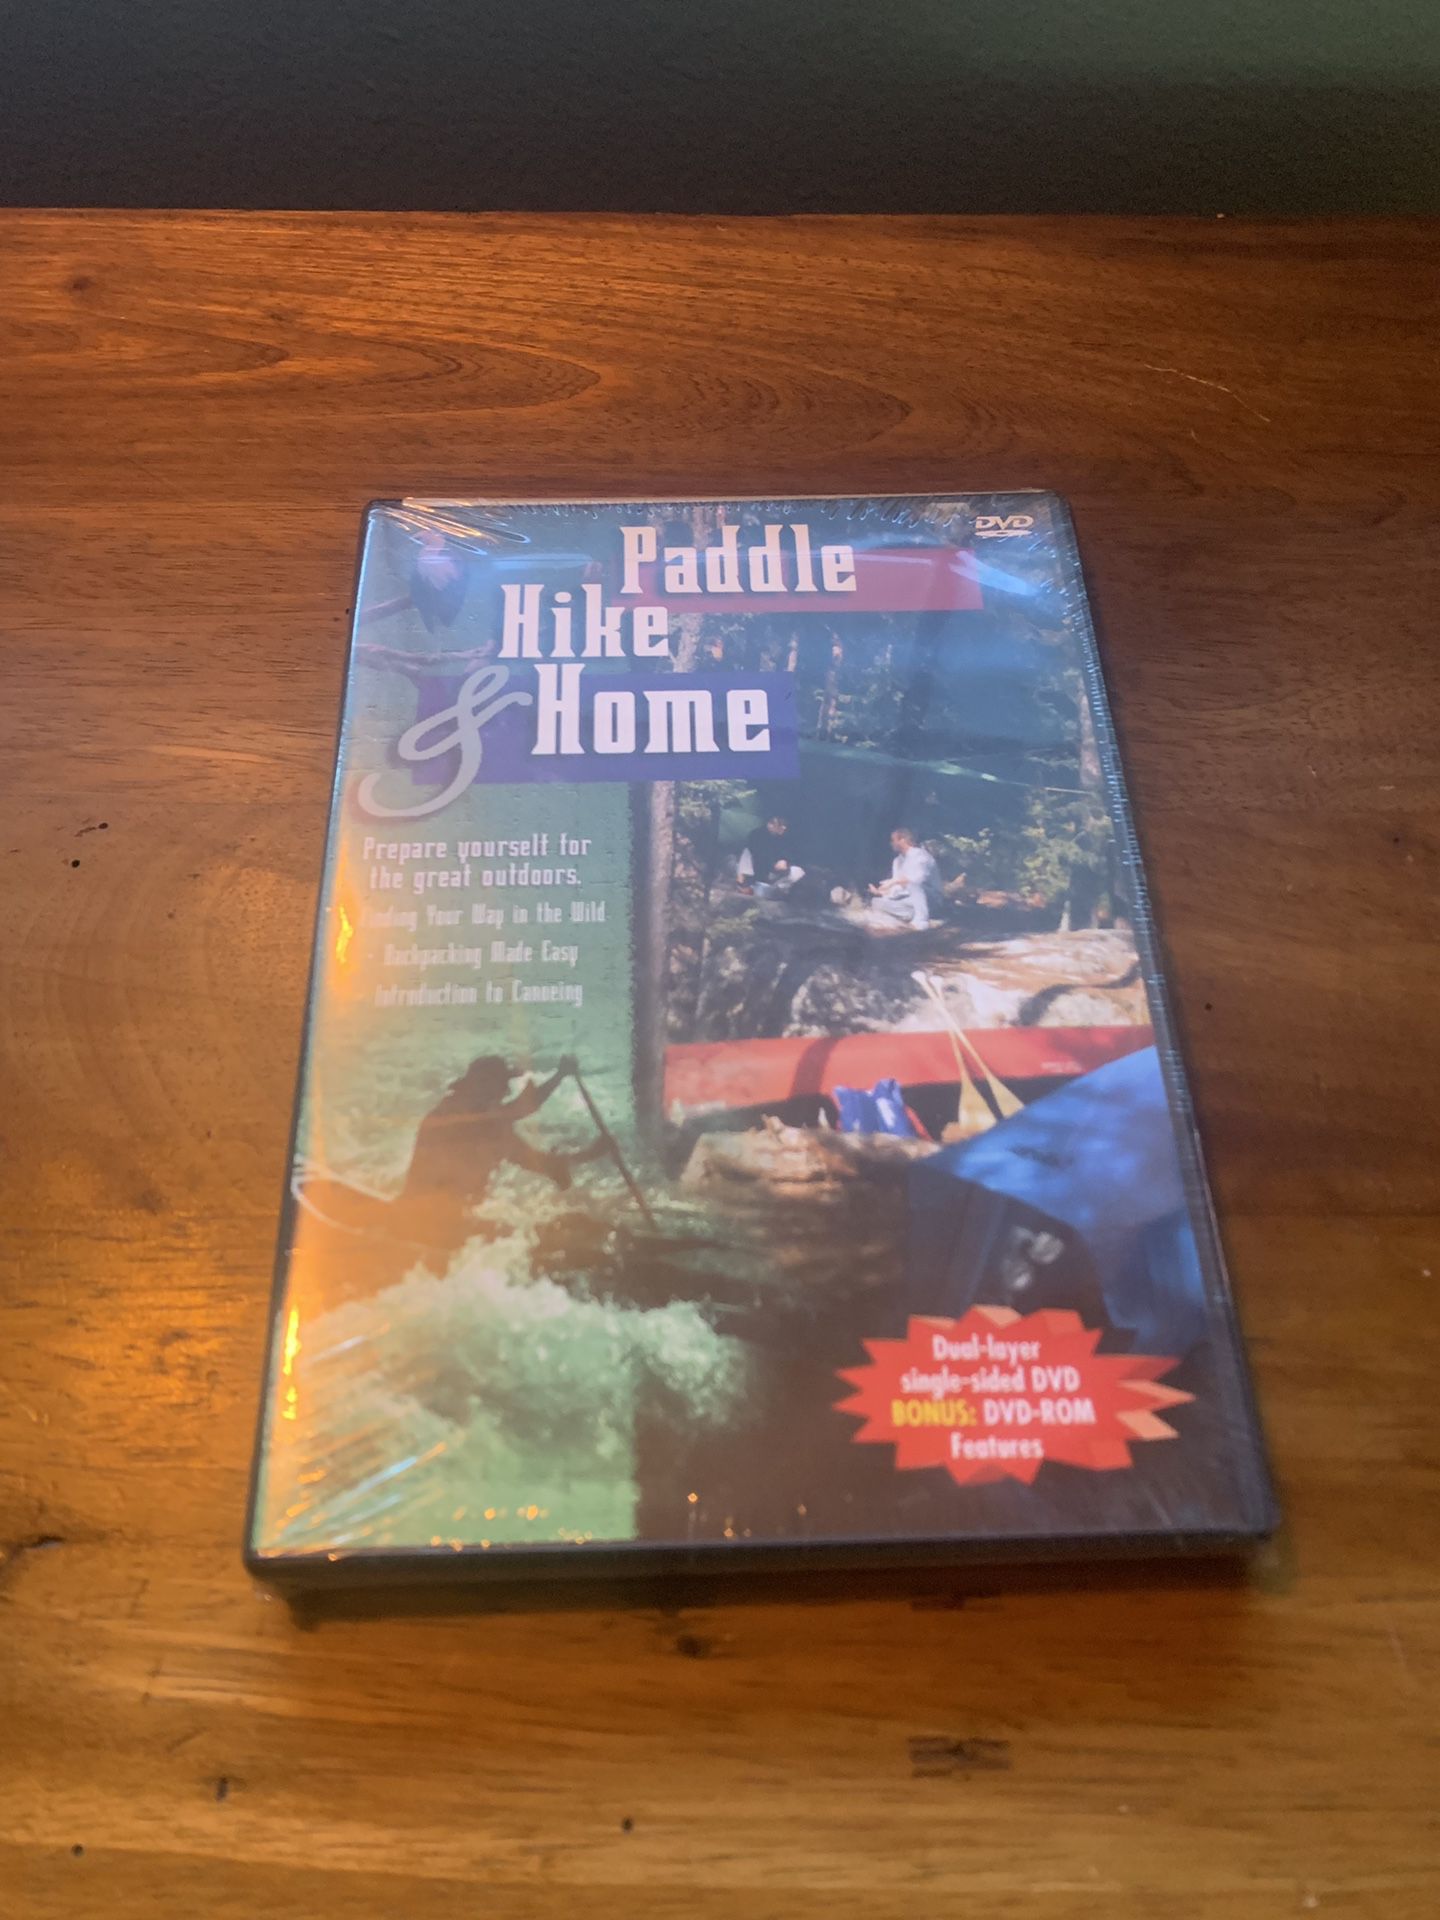 Paddle hike and home outdoor training Dvd